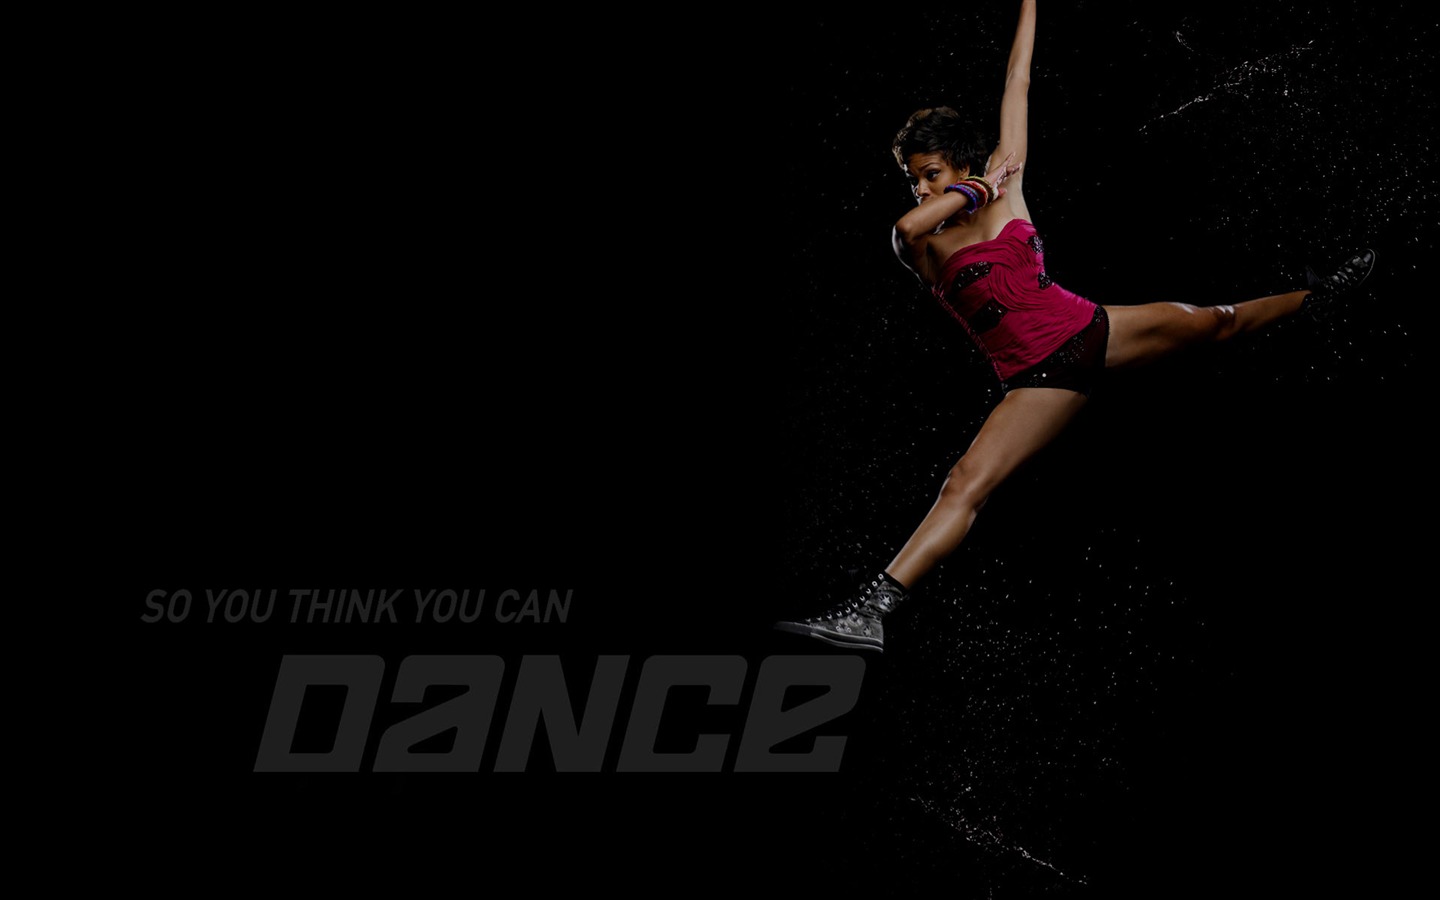 So You Think You Can Dance wallpaper (2) #15 - 1440x900